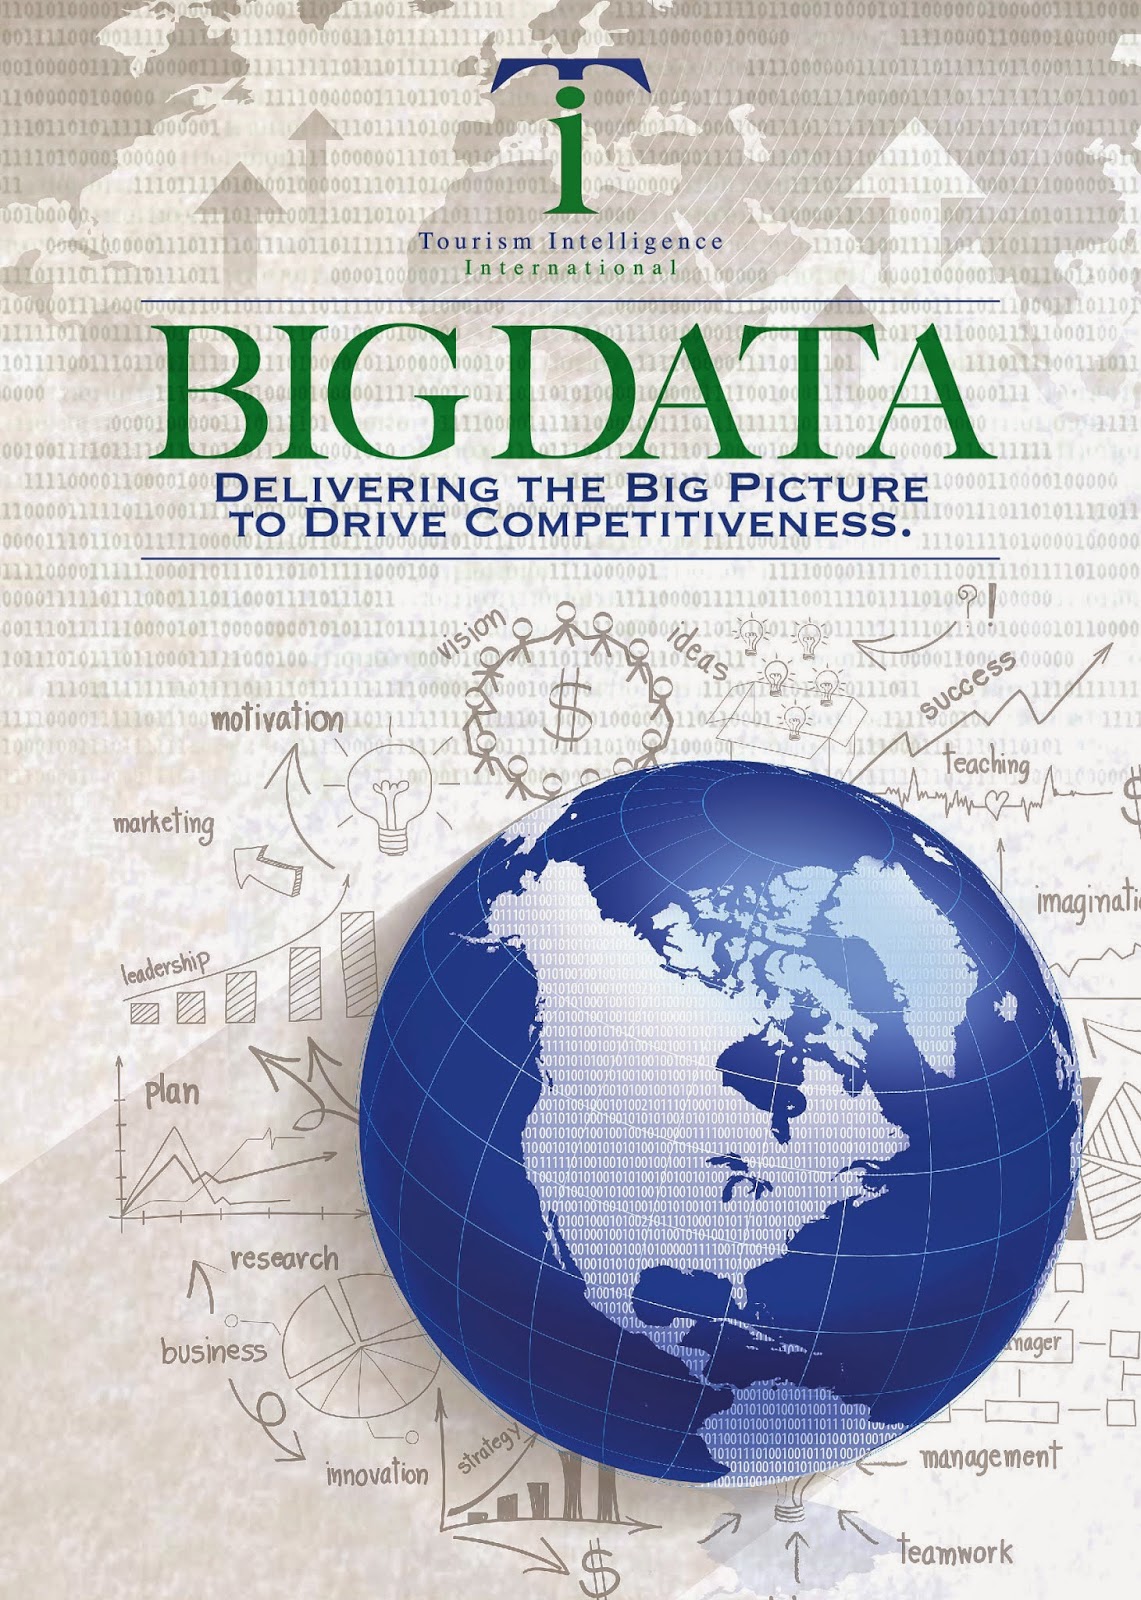 Big Data - Delivering the BIg Picture to Drive Competitiveness